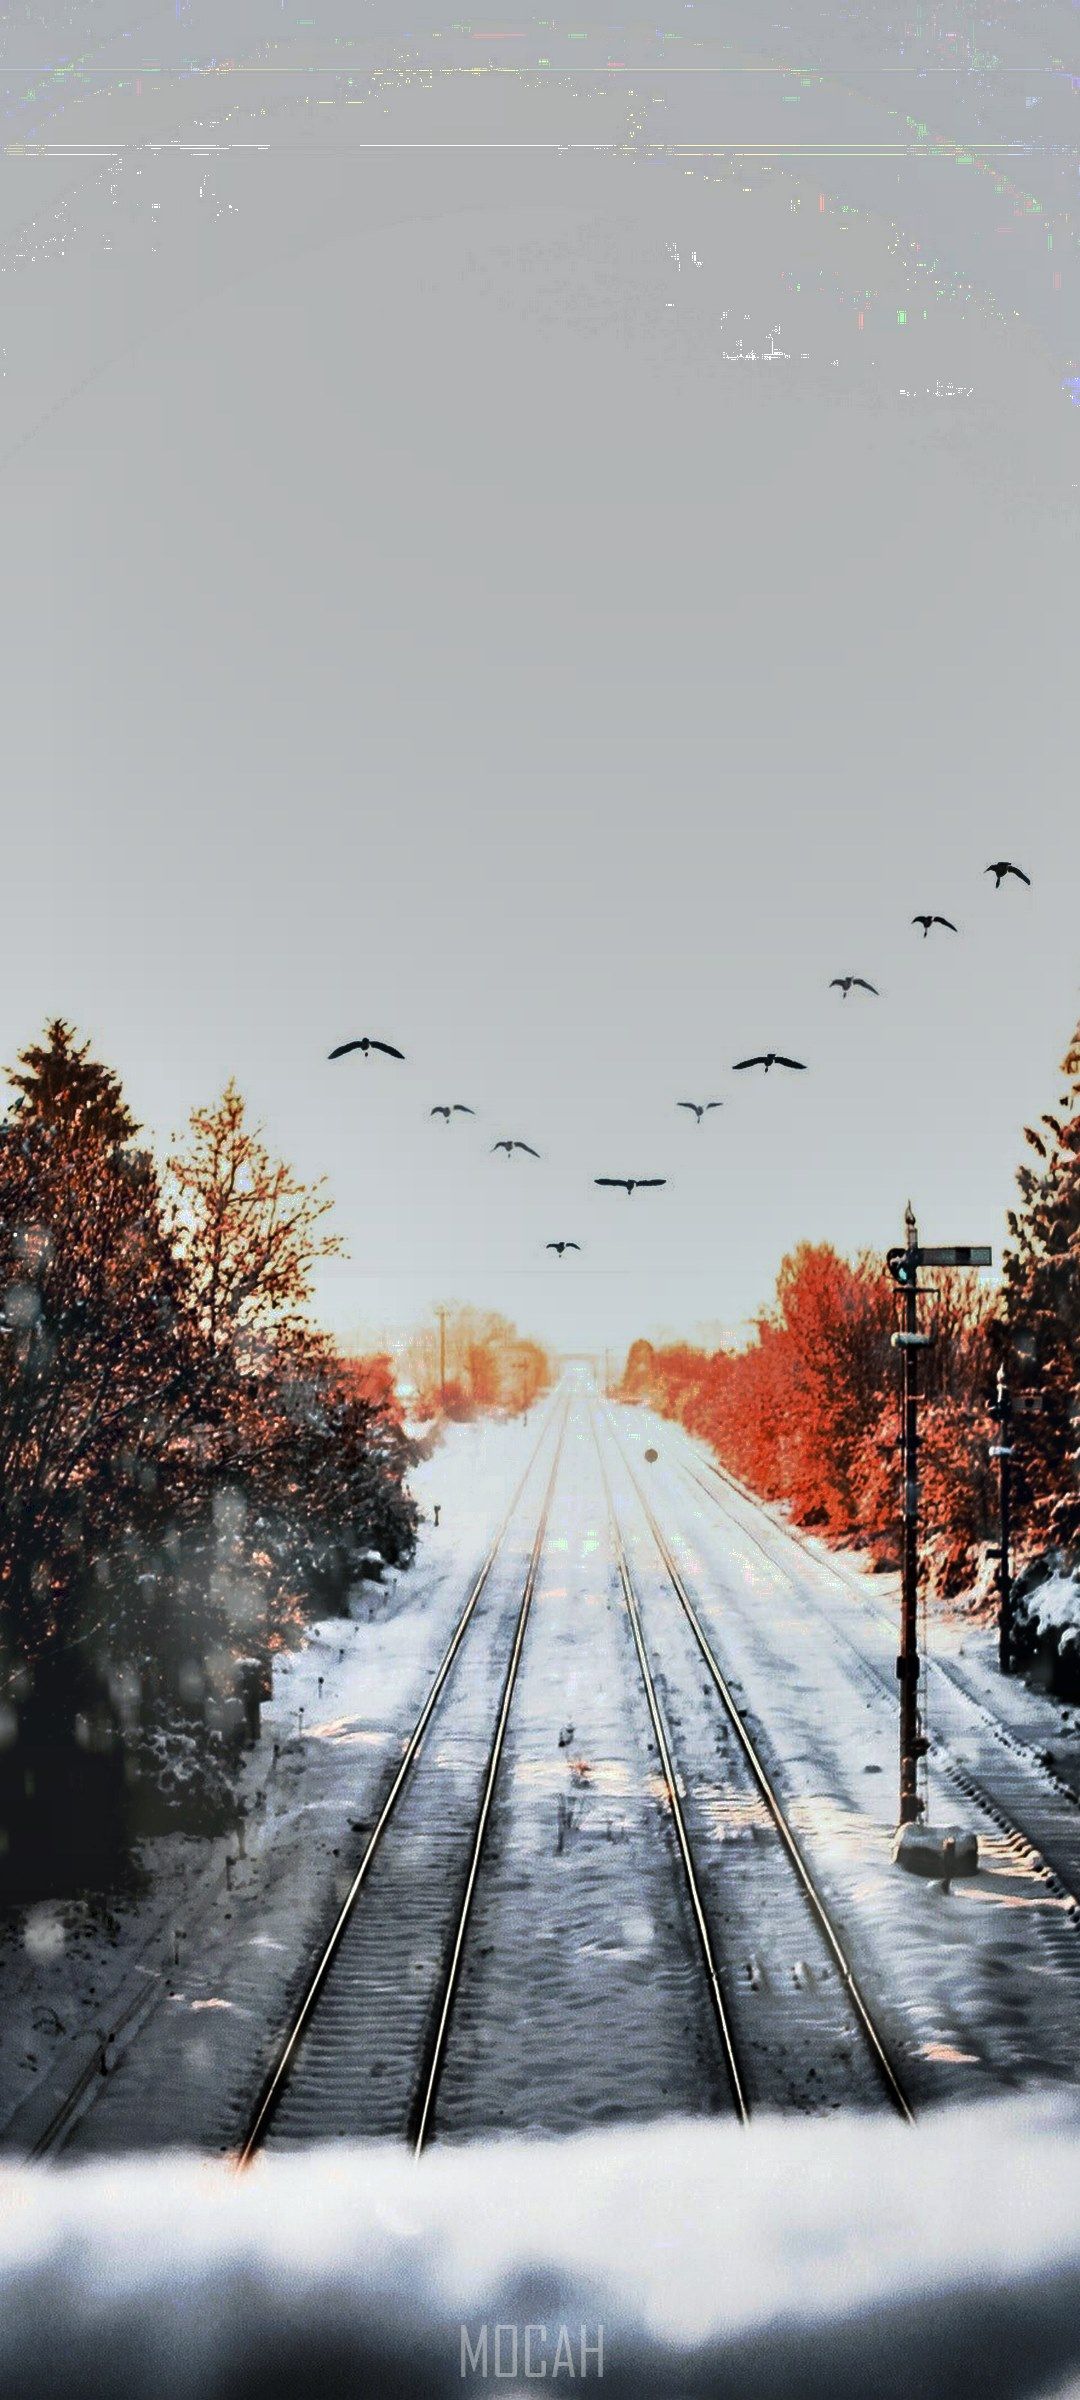 heading home for the winter, Samsung Galaxy S20 FE 5G wallpaper download, 1080x2400. Mocah HD Wallpaper